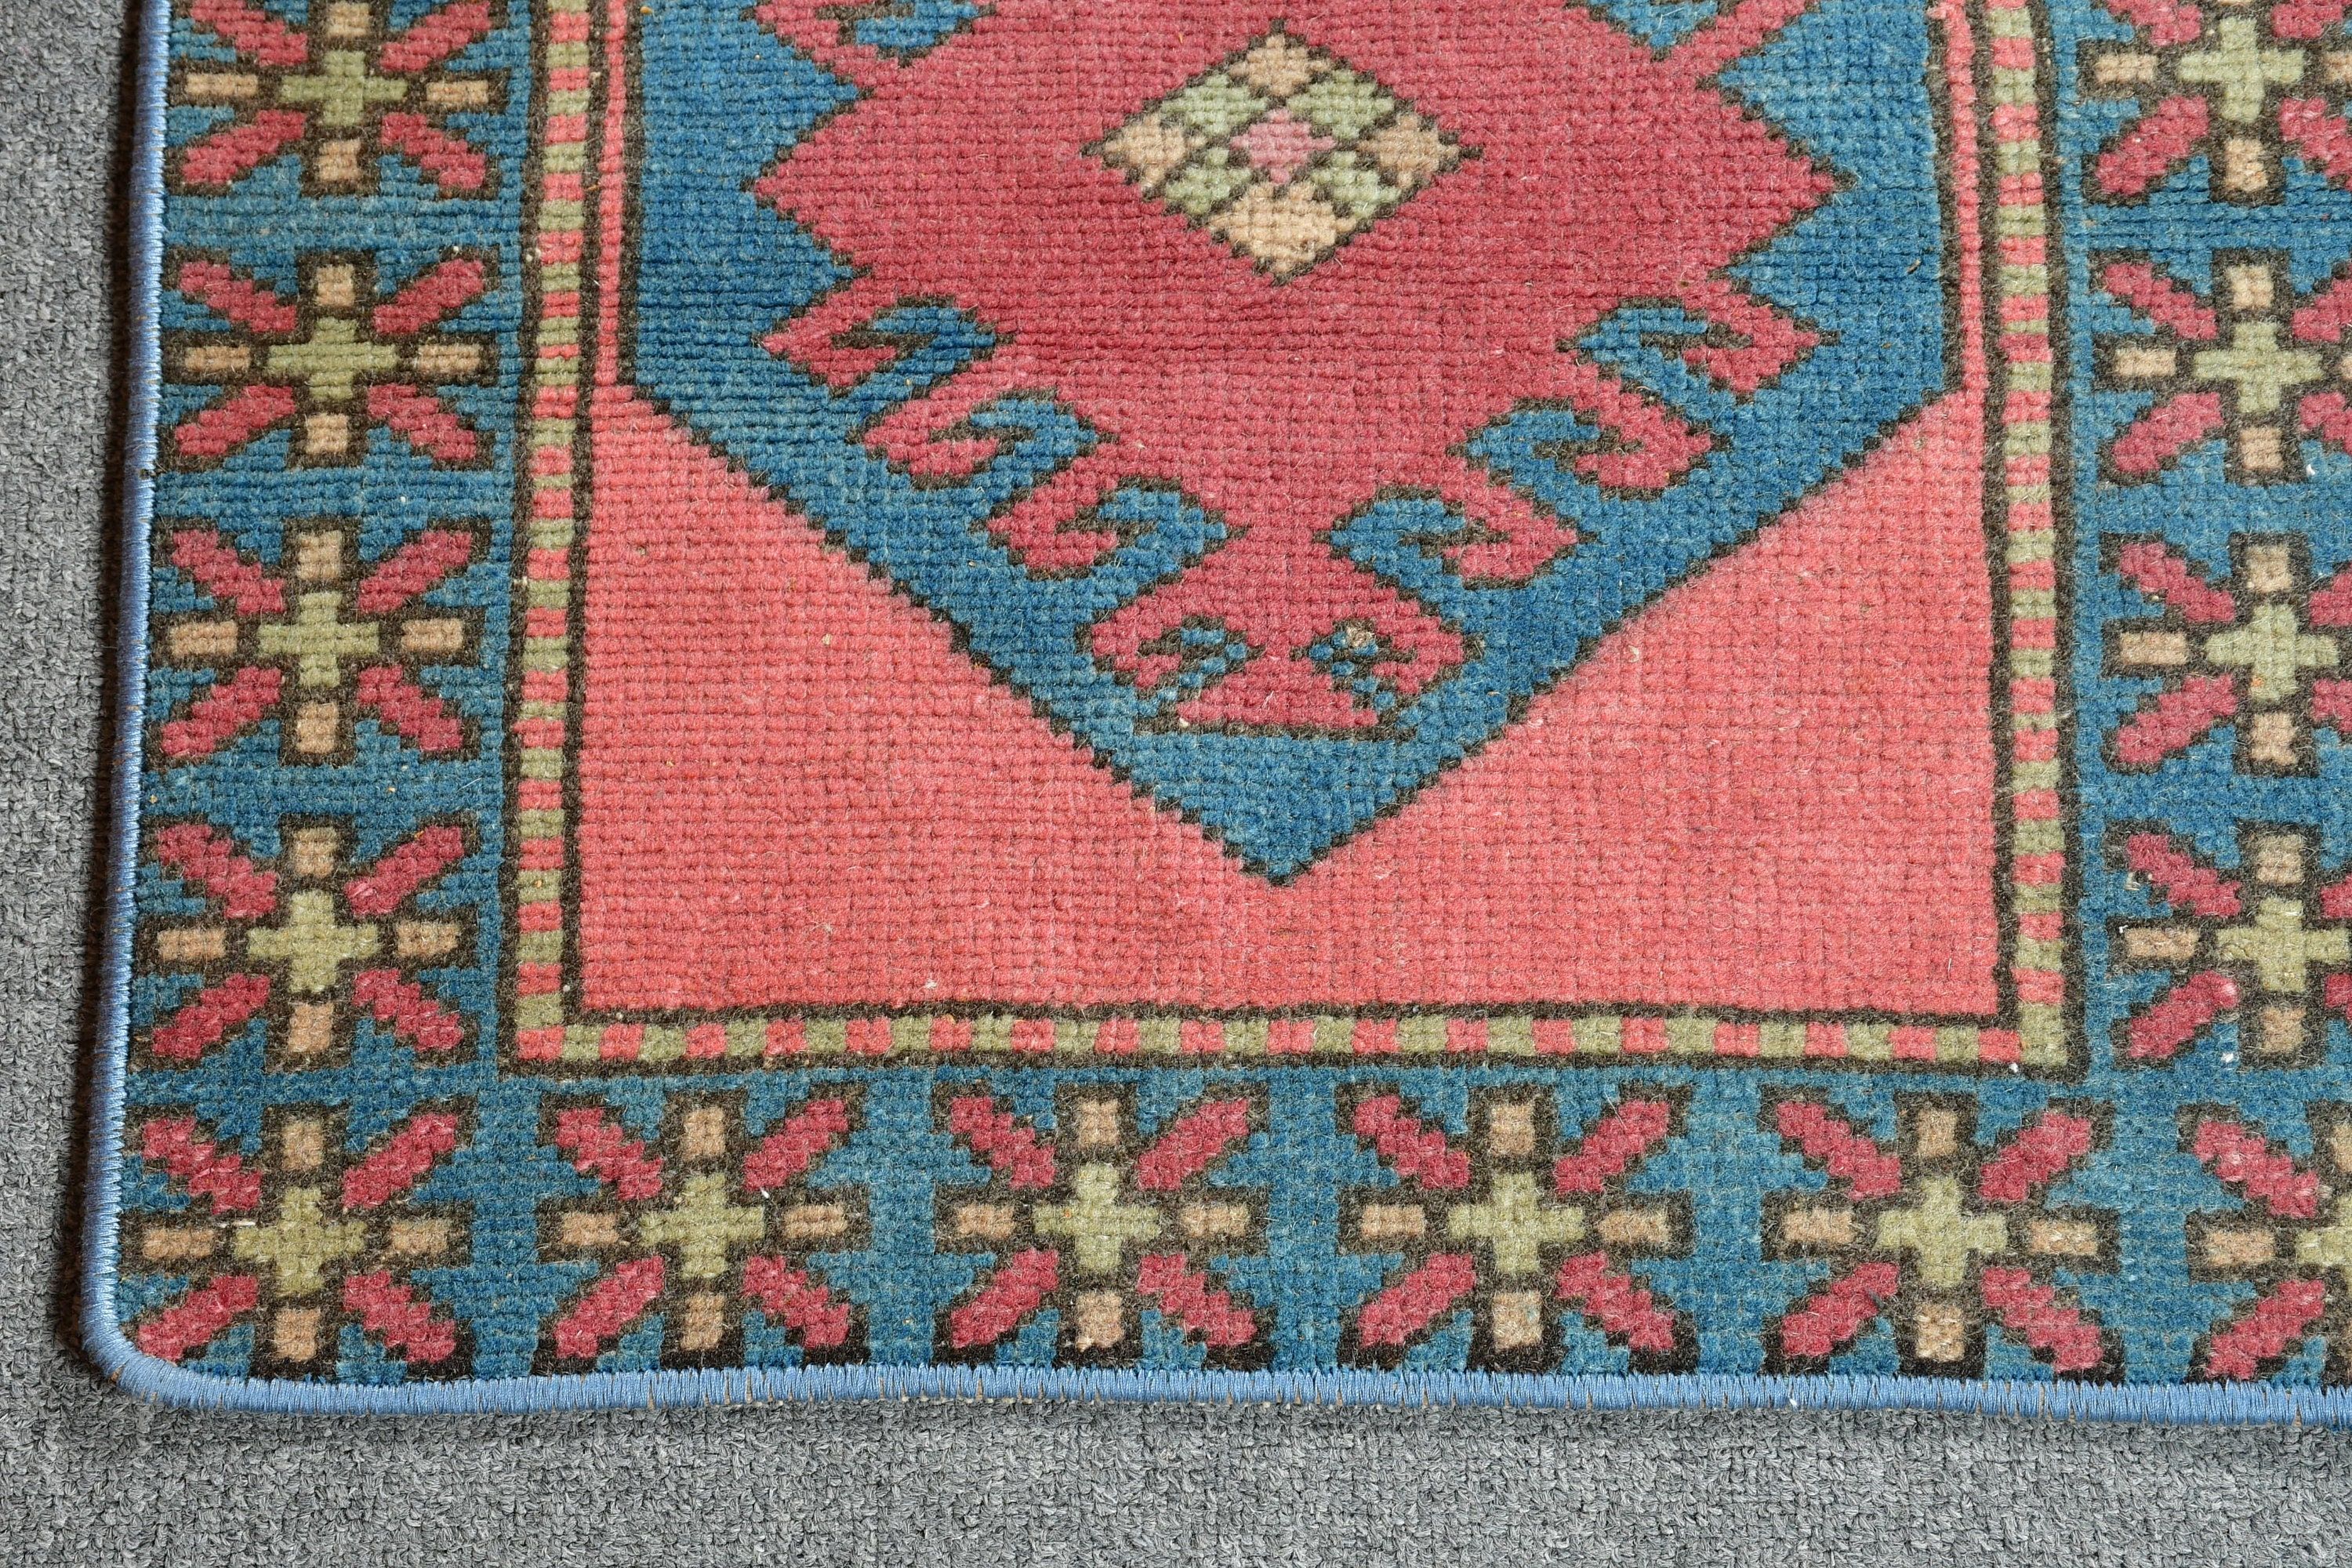 Entry Rug, Turkish Rugs, Vintage Rugs, Blue Anatolian Rug, Kitchen Rug, Retro Rugs, Wall Hanging Rugs, 1.6x1.7 ft Small Rug, Anatolian Rugs